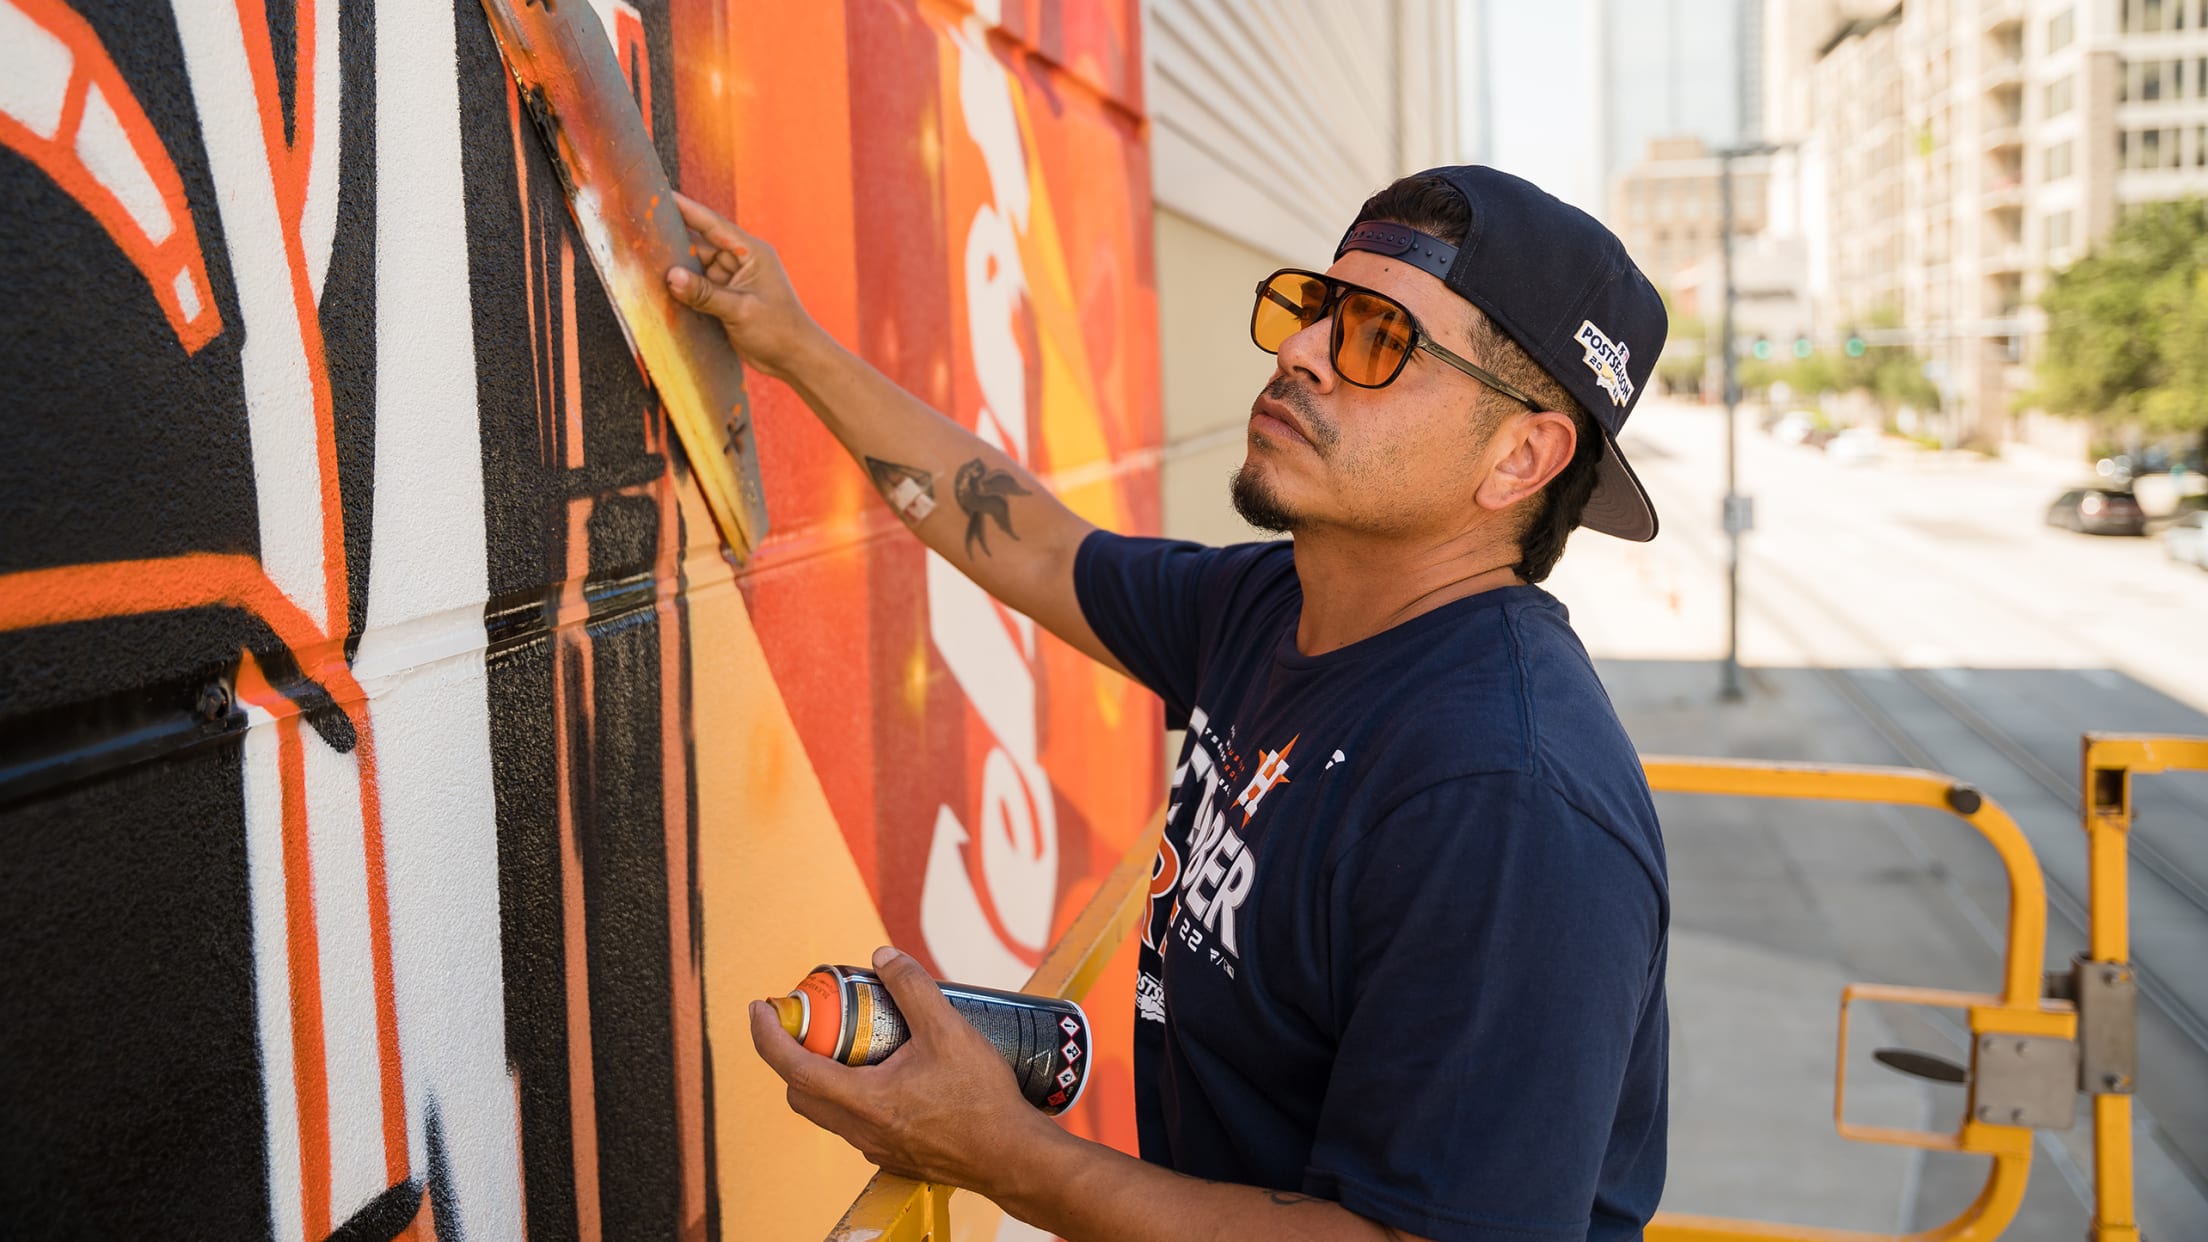 Houston Astros: Artists collaborate to paint 60th anniversary mural  revealed during annual FanFest - ABC13 Houston